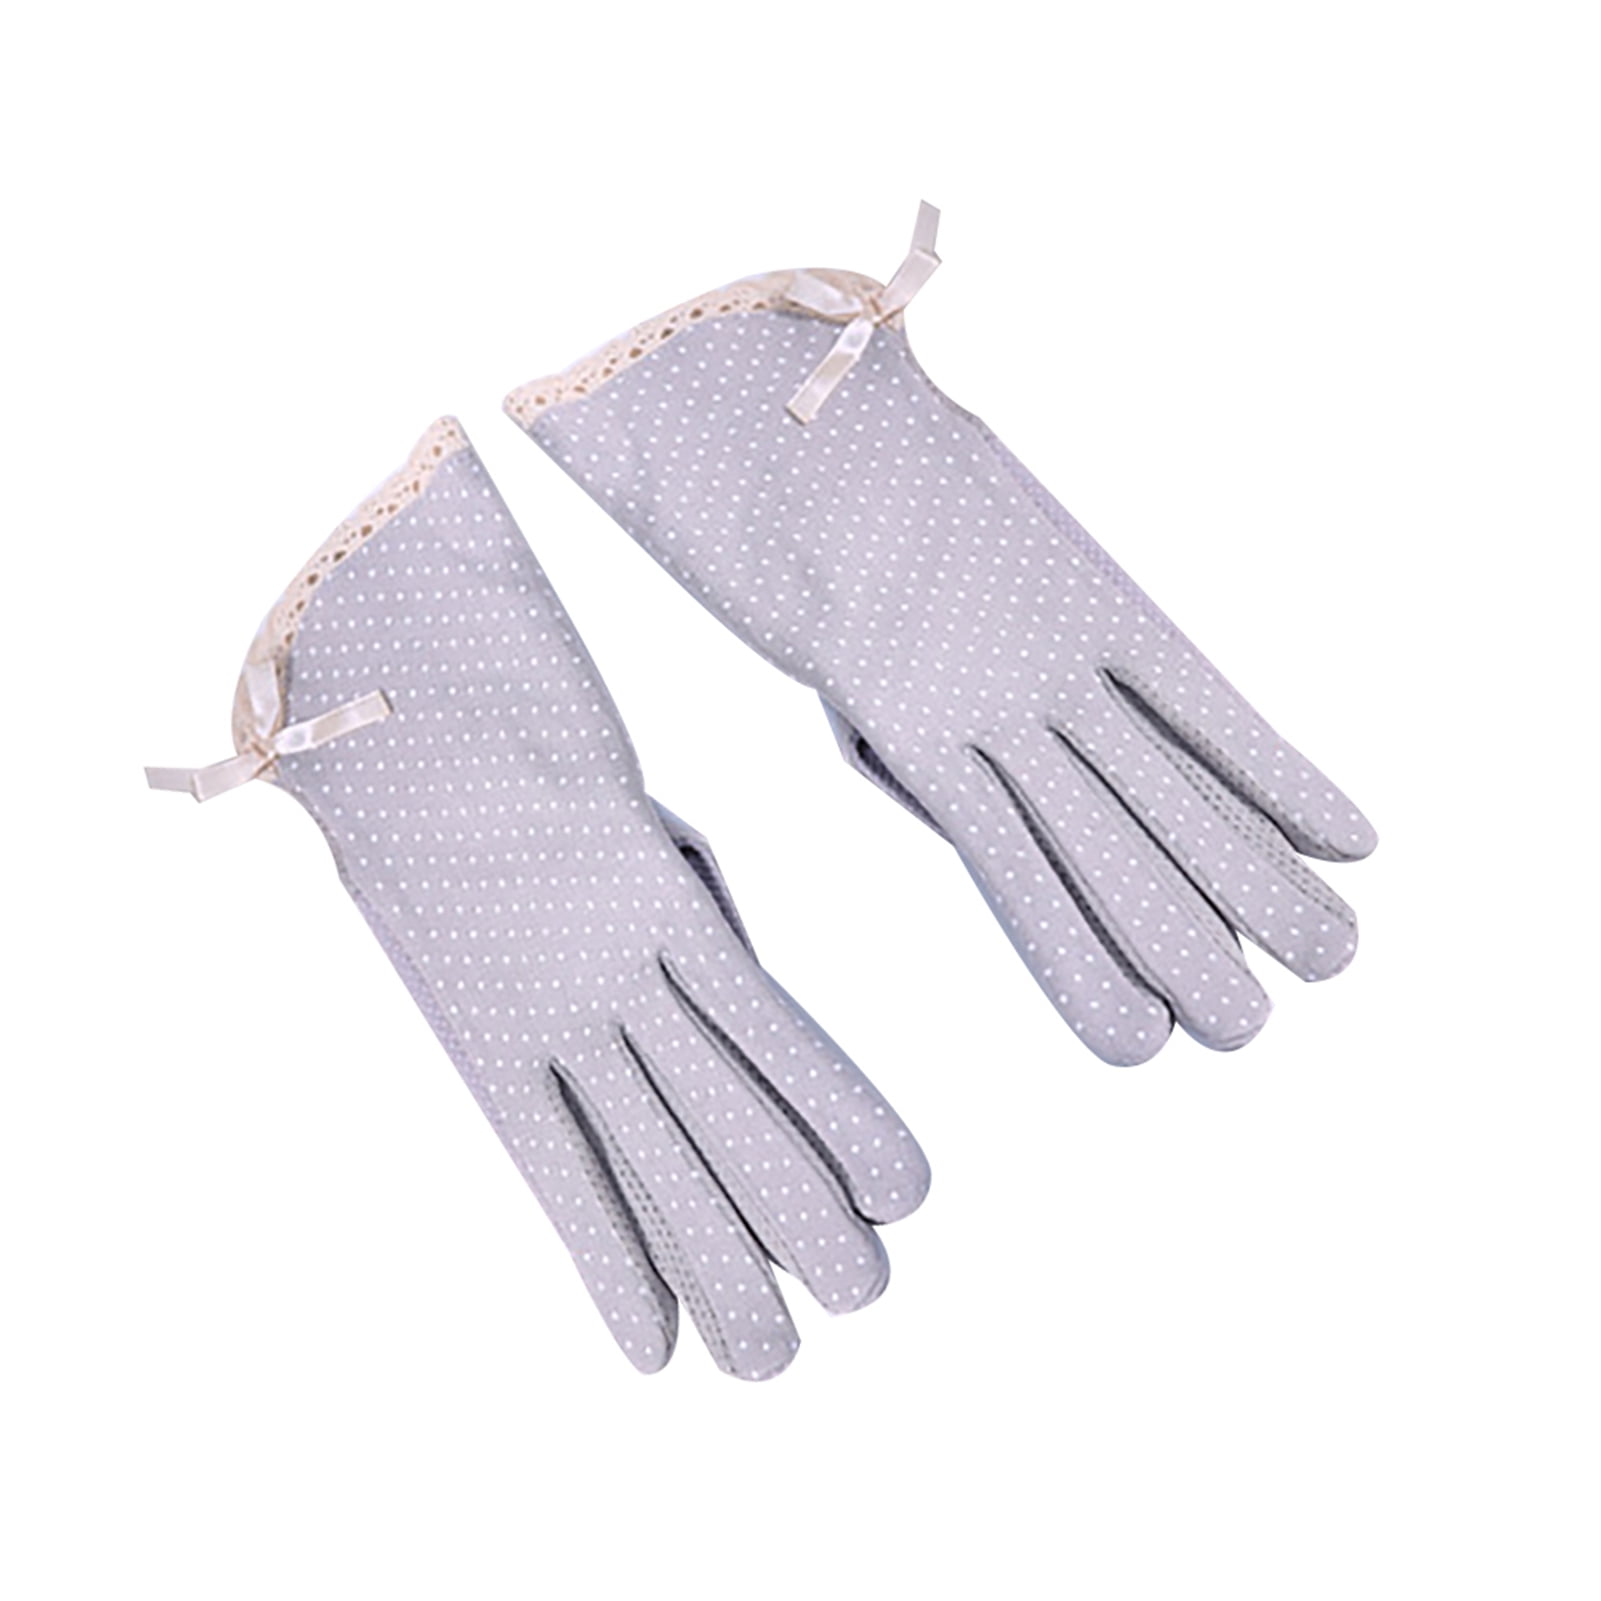 Grofry Women Gloves,Summer Cotton Lace Anti-Slip Touch Screen Sun  Protection Driving Mitten Grey 